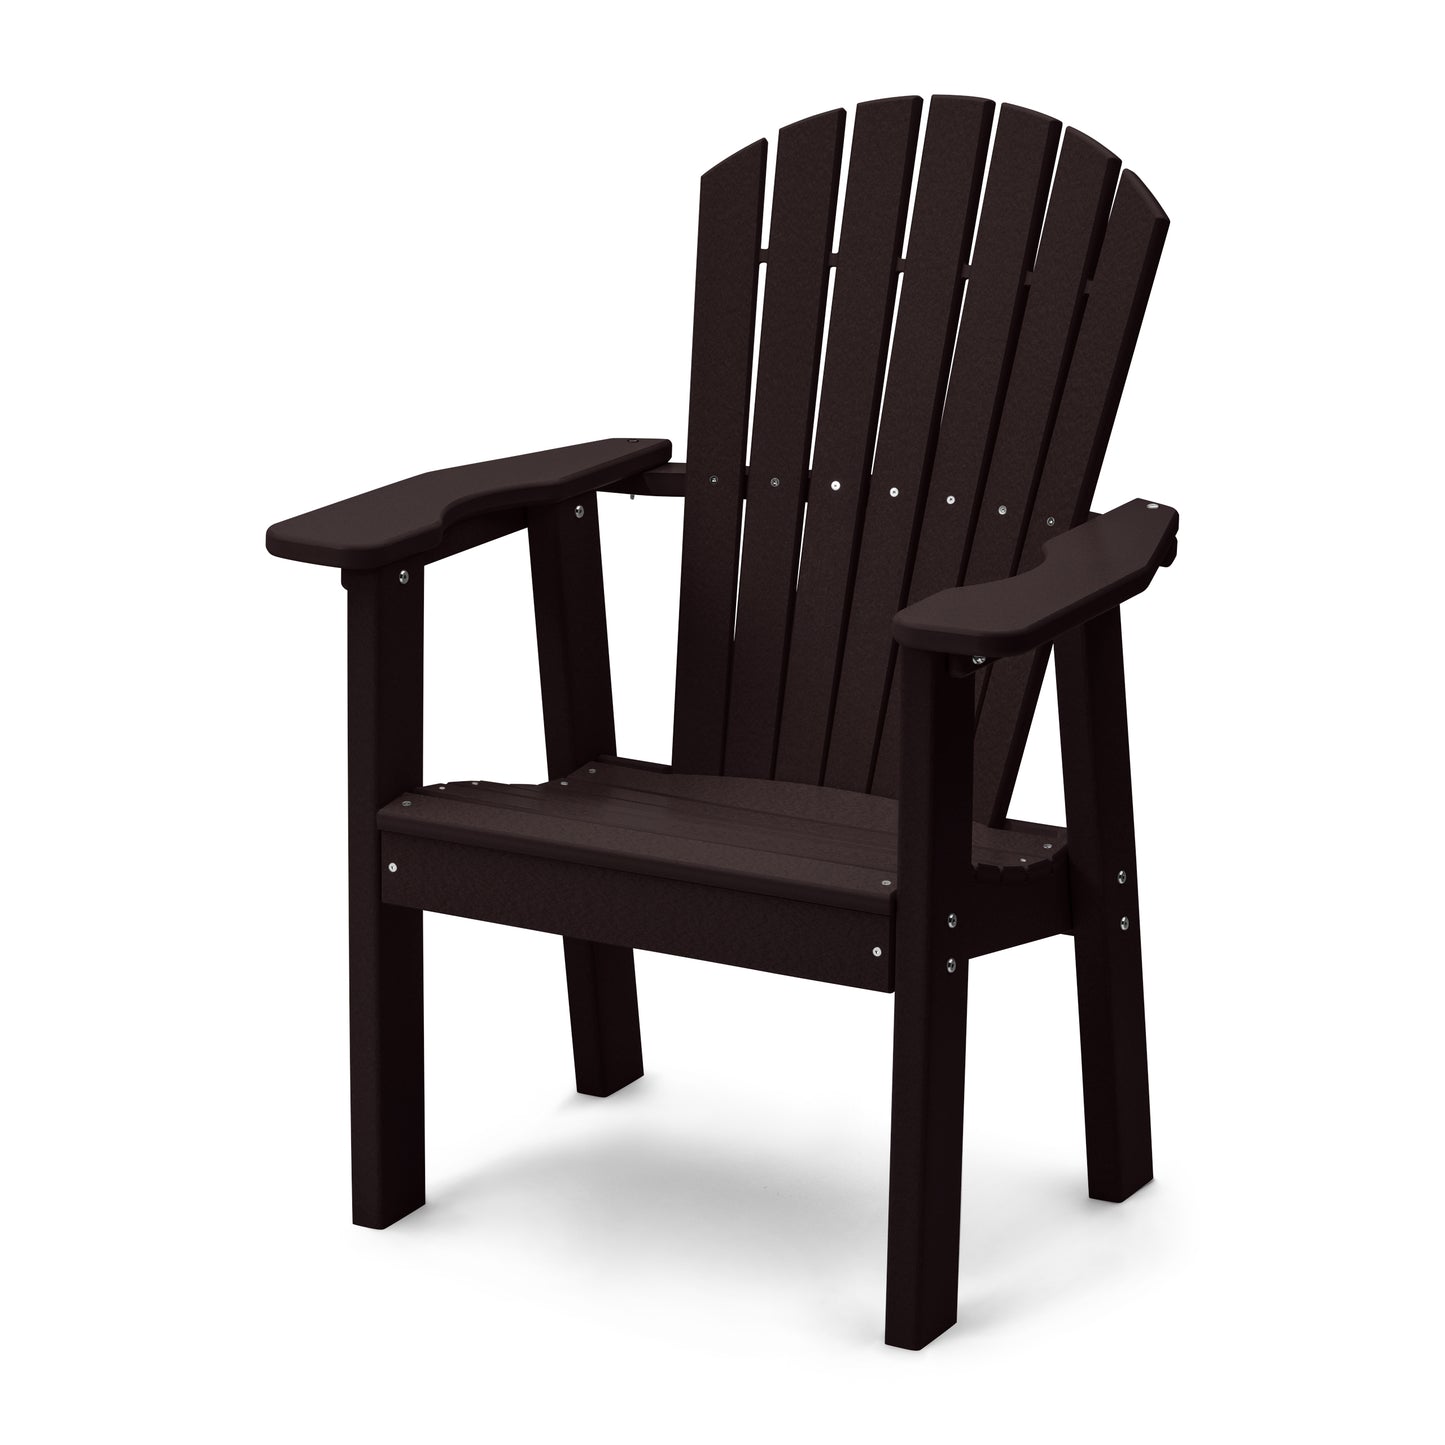 Perfect Choice Recycled Plastic Classic Upright Adirondack Chair with Elevated Seat Height - LEAD TIME TO SHIP 4 WEEKS OR LESS